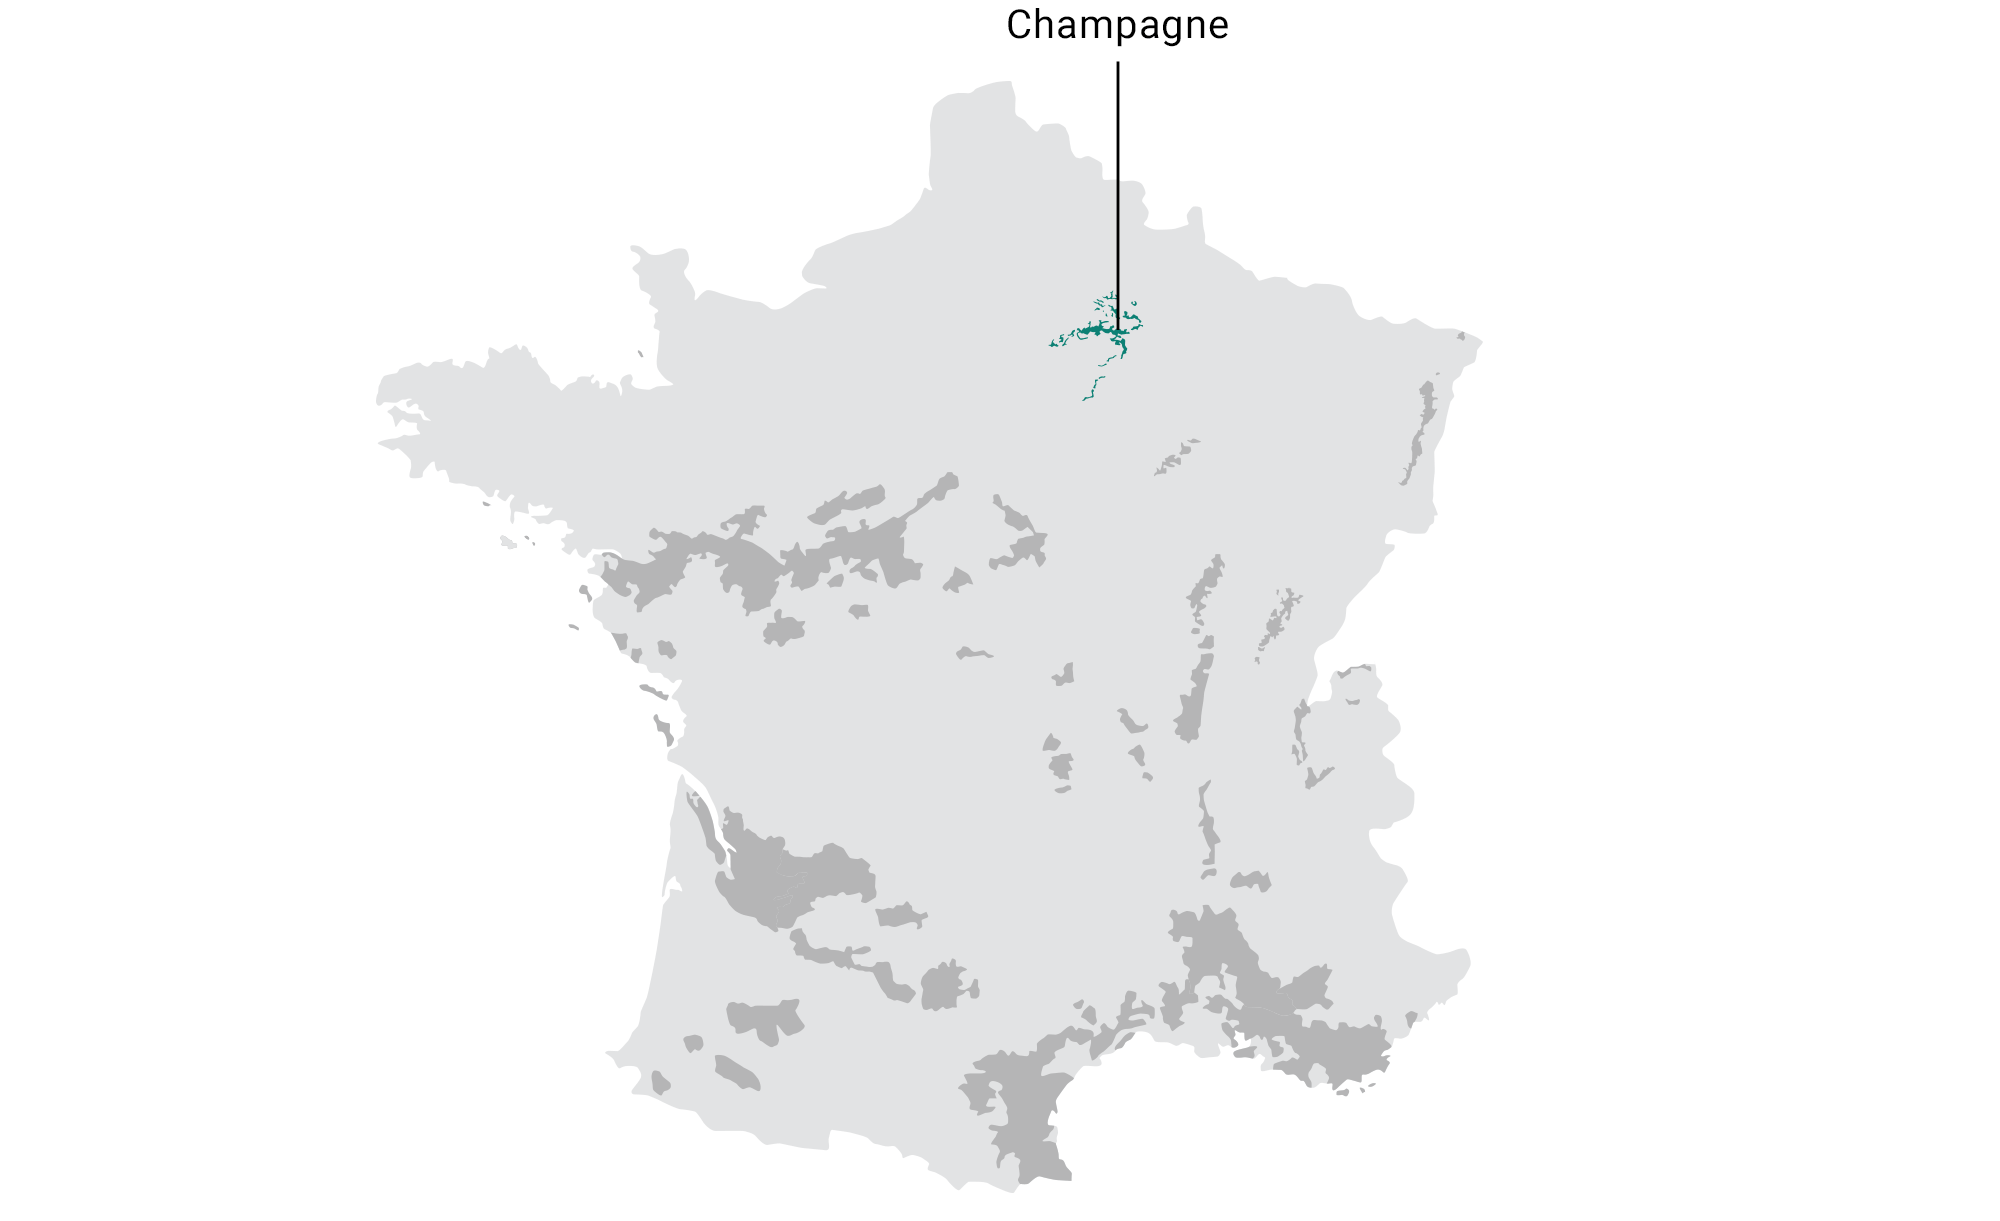 map of Champagne region in France